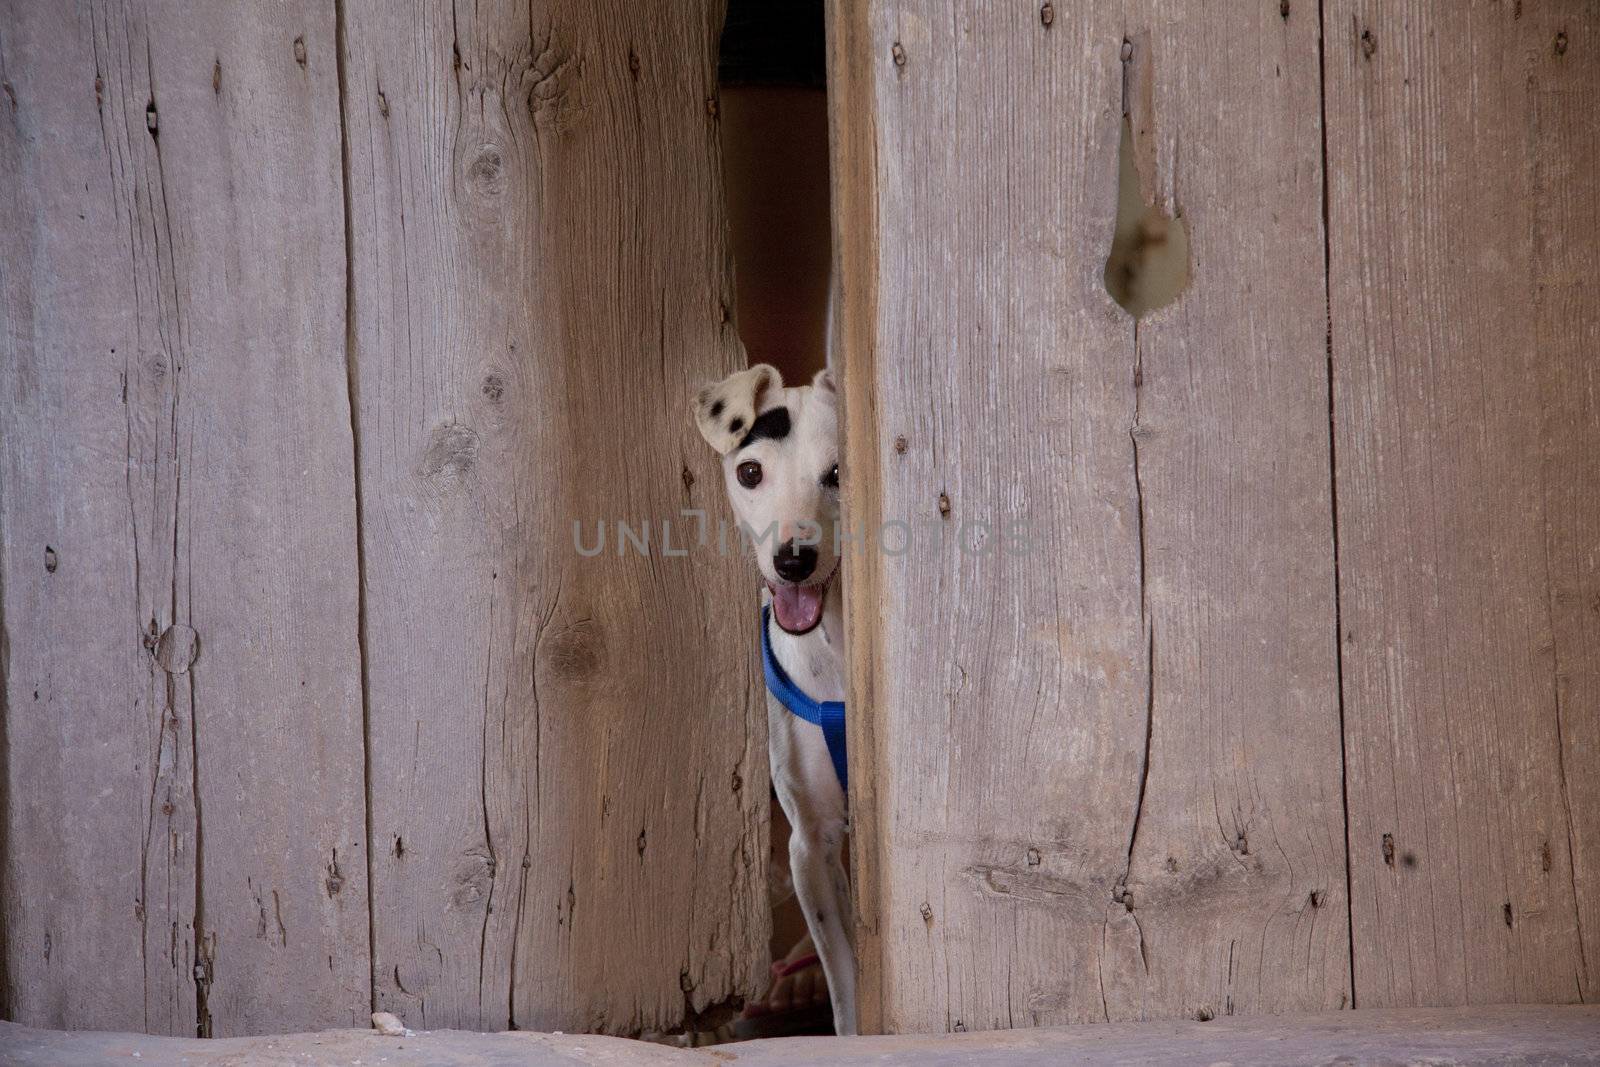 Dog peeping out through barn door by annems